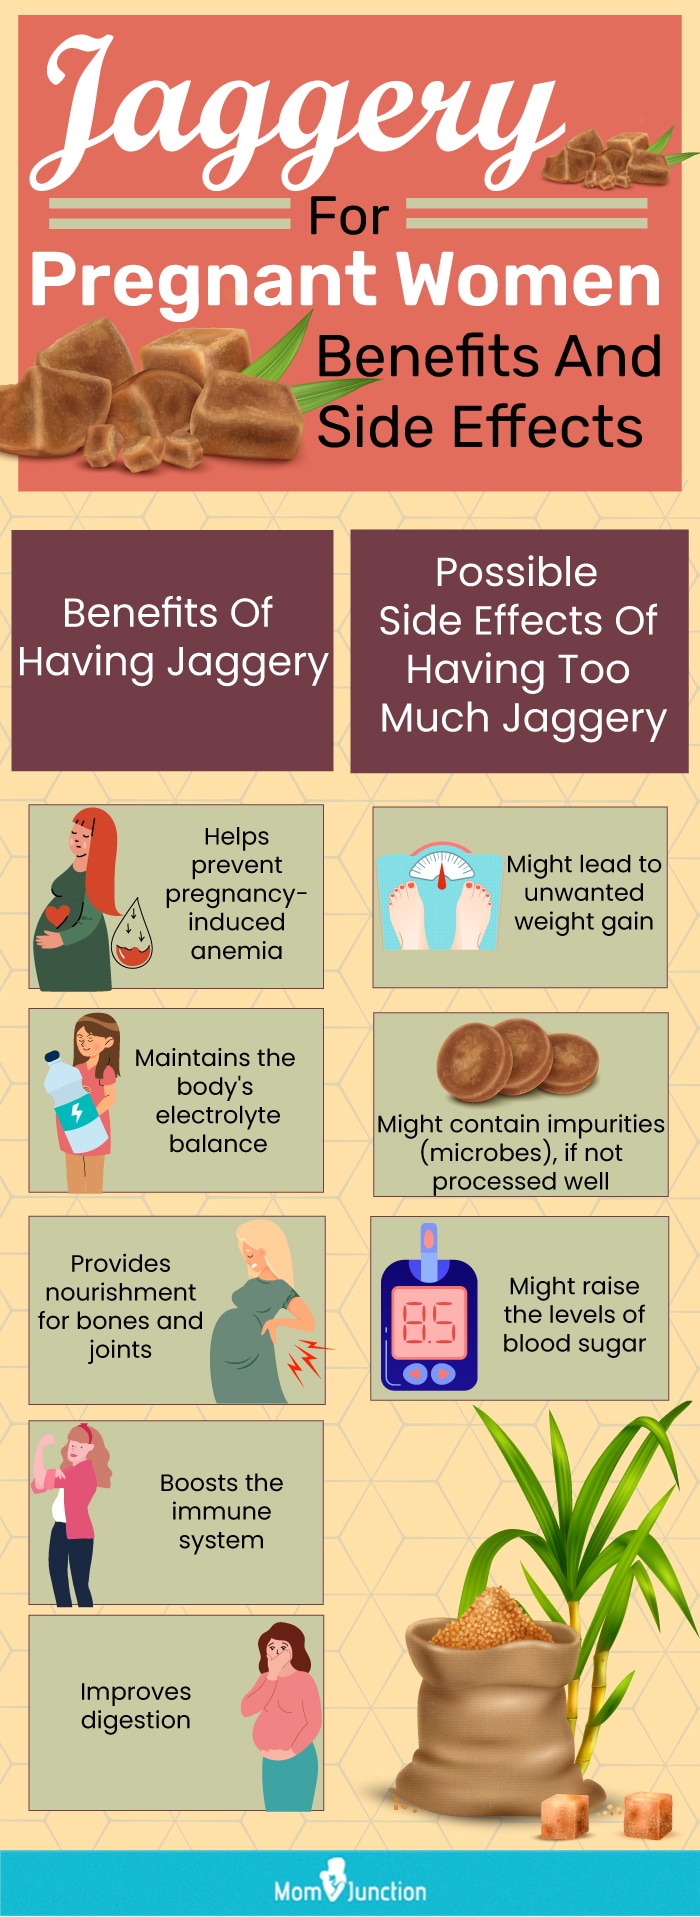 benefits and side effects of including jaggery during pregnancy (infographic)